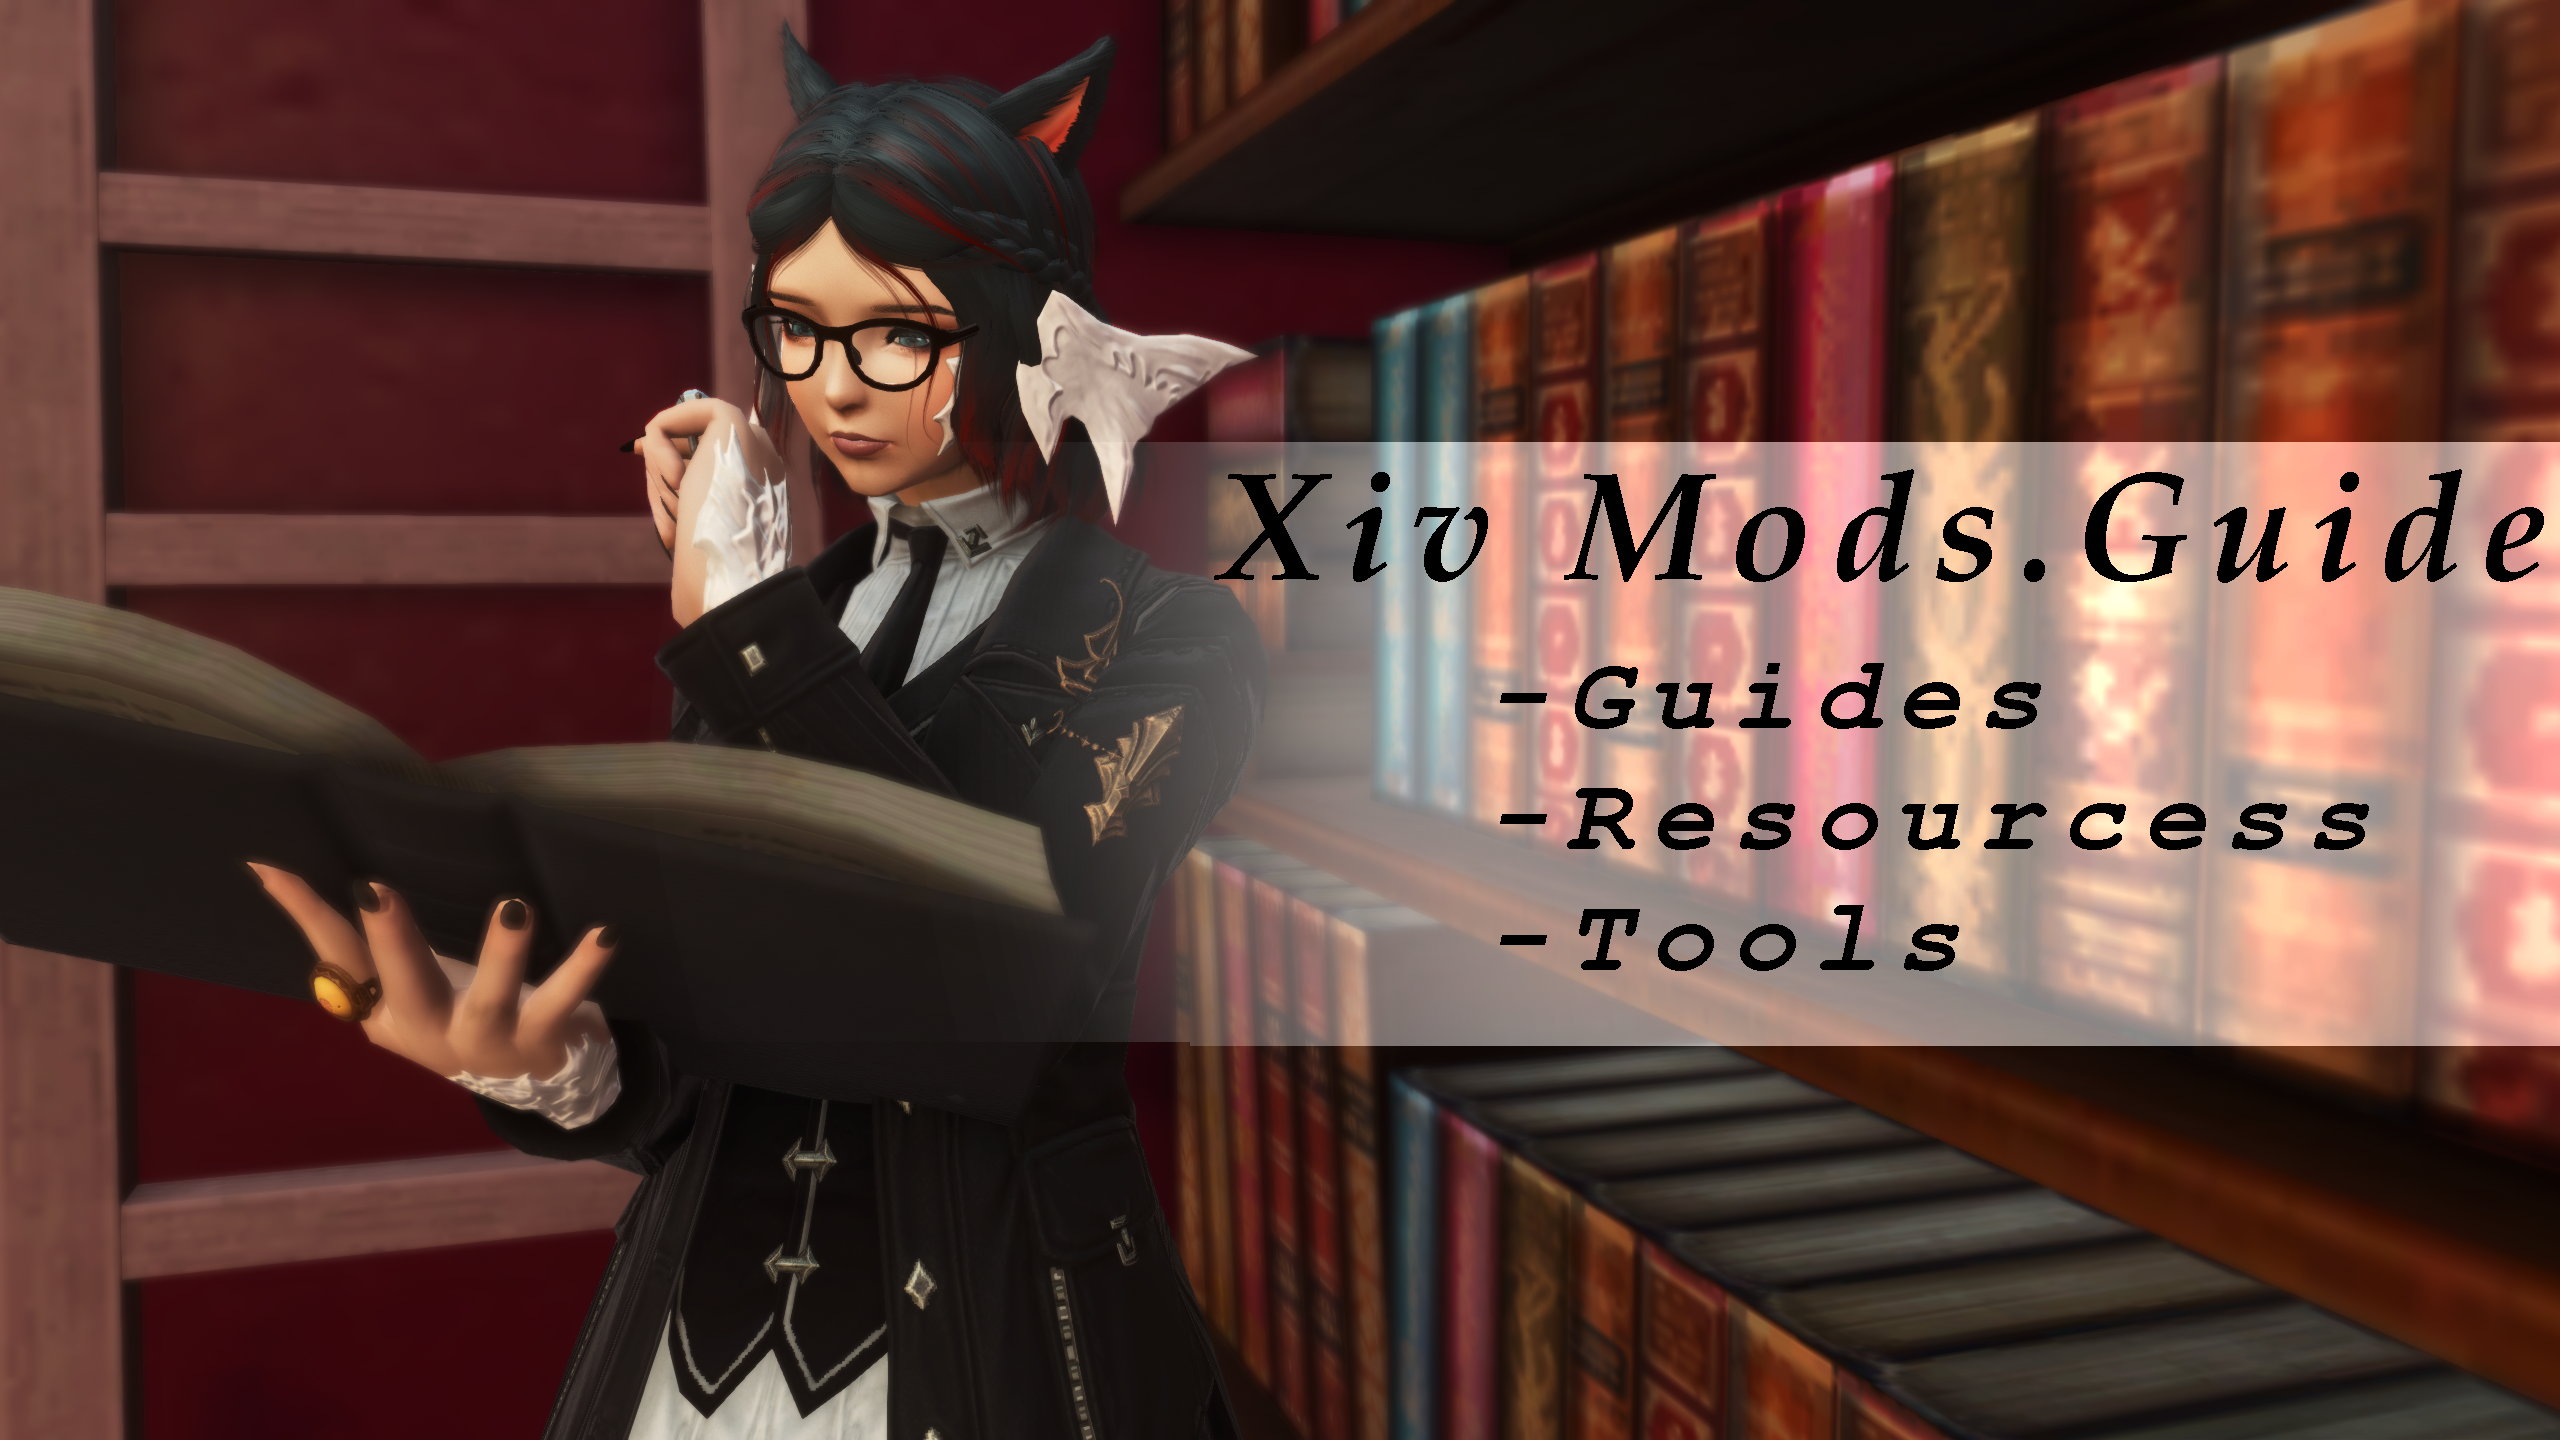 A character from Final Fantasy XIV is shown with text indicating a guide for mods, resources, and tools for the game.